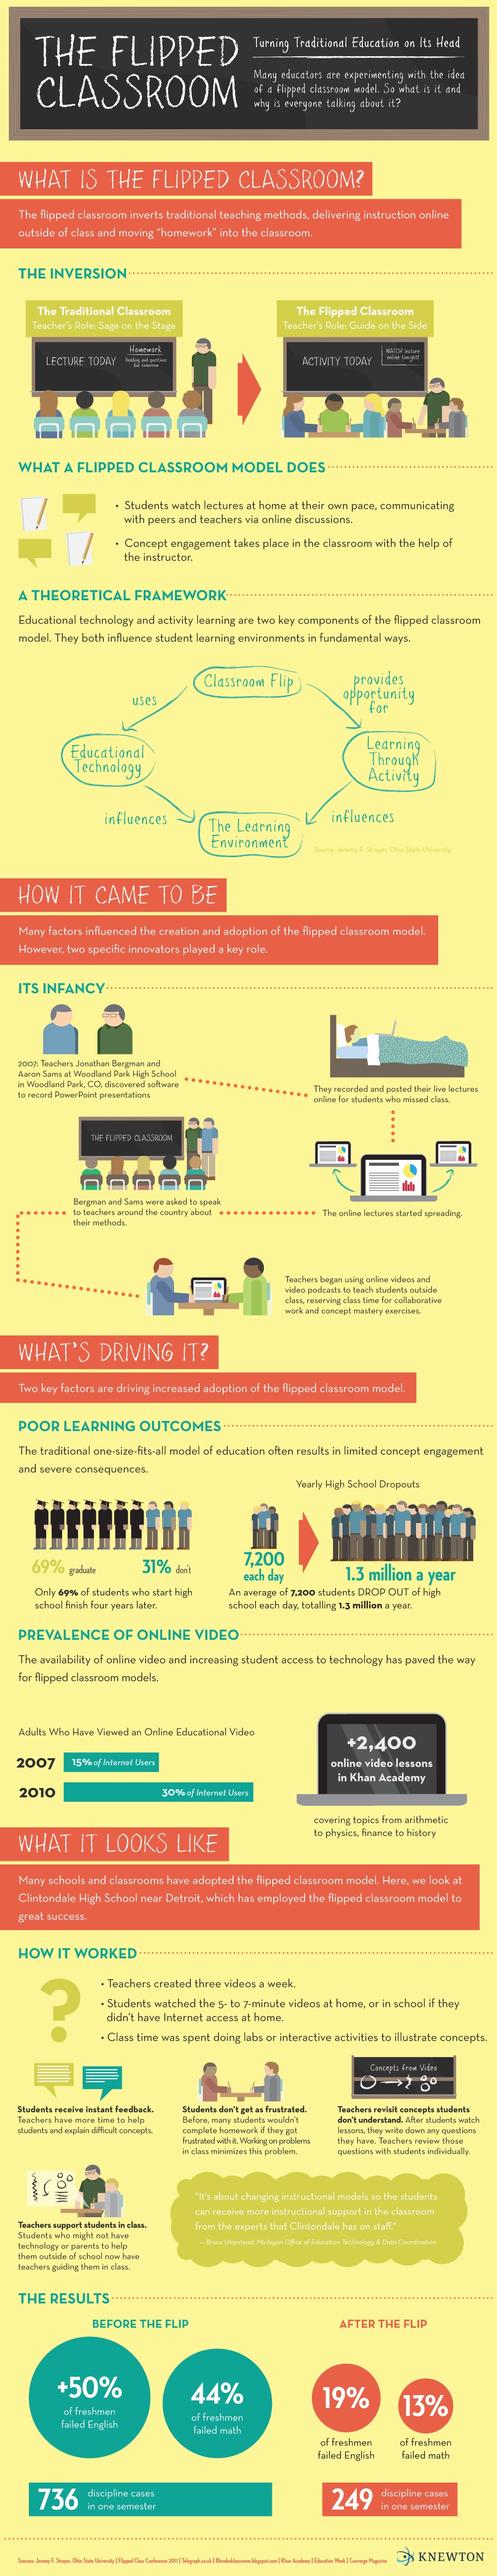 The Flipped Classroom Infographic: Turning Traditional Education On Its Head